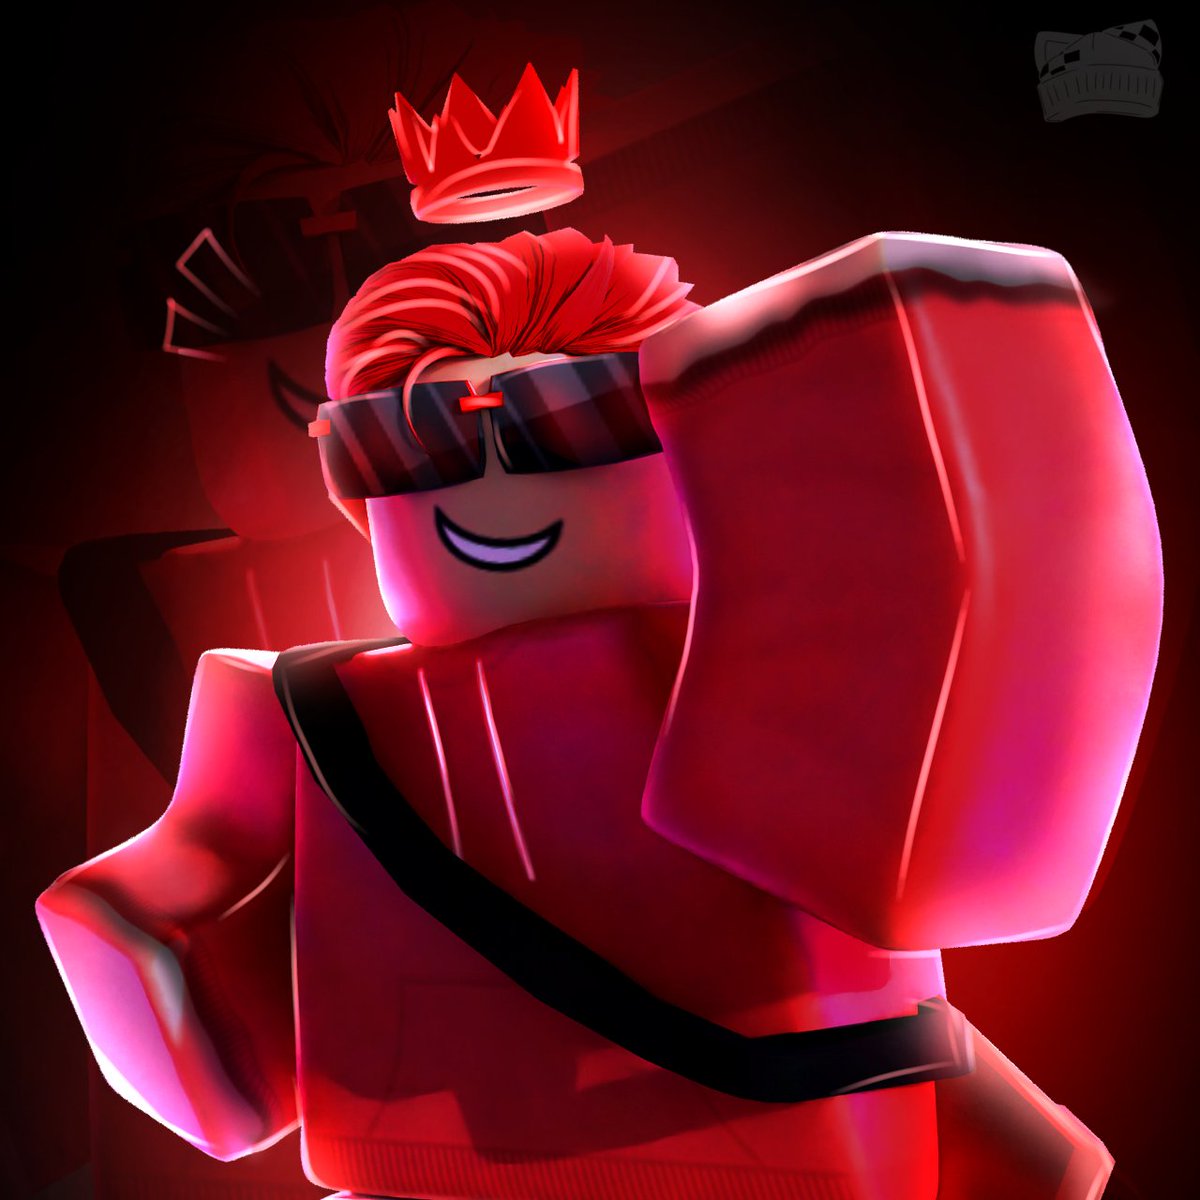 Doing FREE Roblox GFX PFPs ❕
▪︎Like and Repost (❤+♻️)
▪︎Follow @1k_SimonePlayz 👤
▪︎Comment your Roblox Users 👇
▪︎Ends at 27.4k Followers ⏳ -> GL!
-
#roblox #robloxart #robloxartists #artmoots #robloxdevs #robloxgfx #robuxcommission #robloxugc #robloxlogos